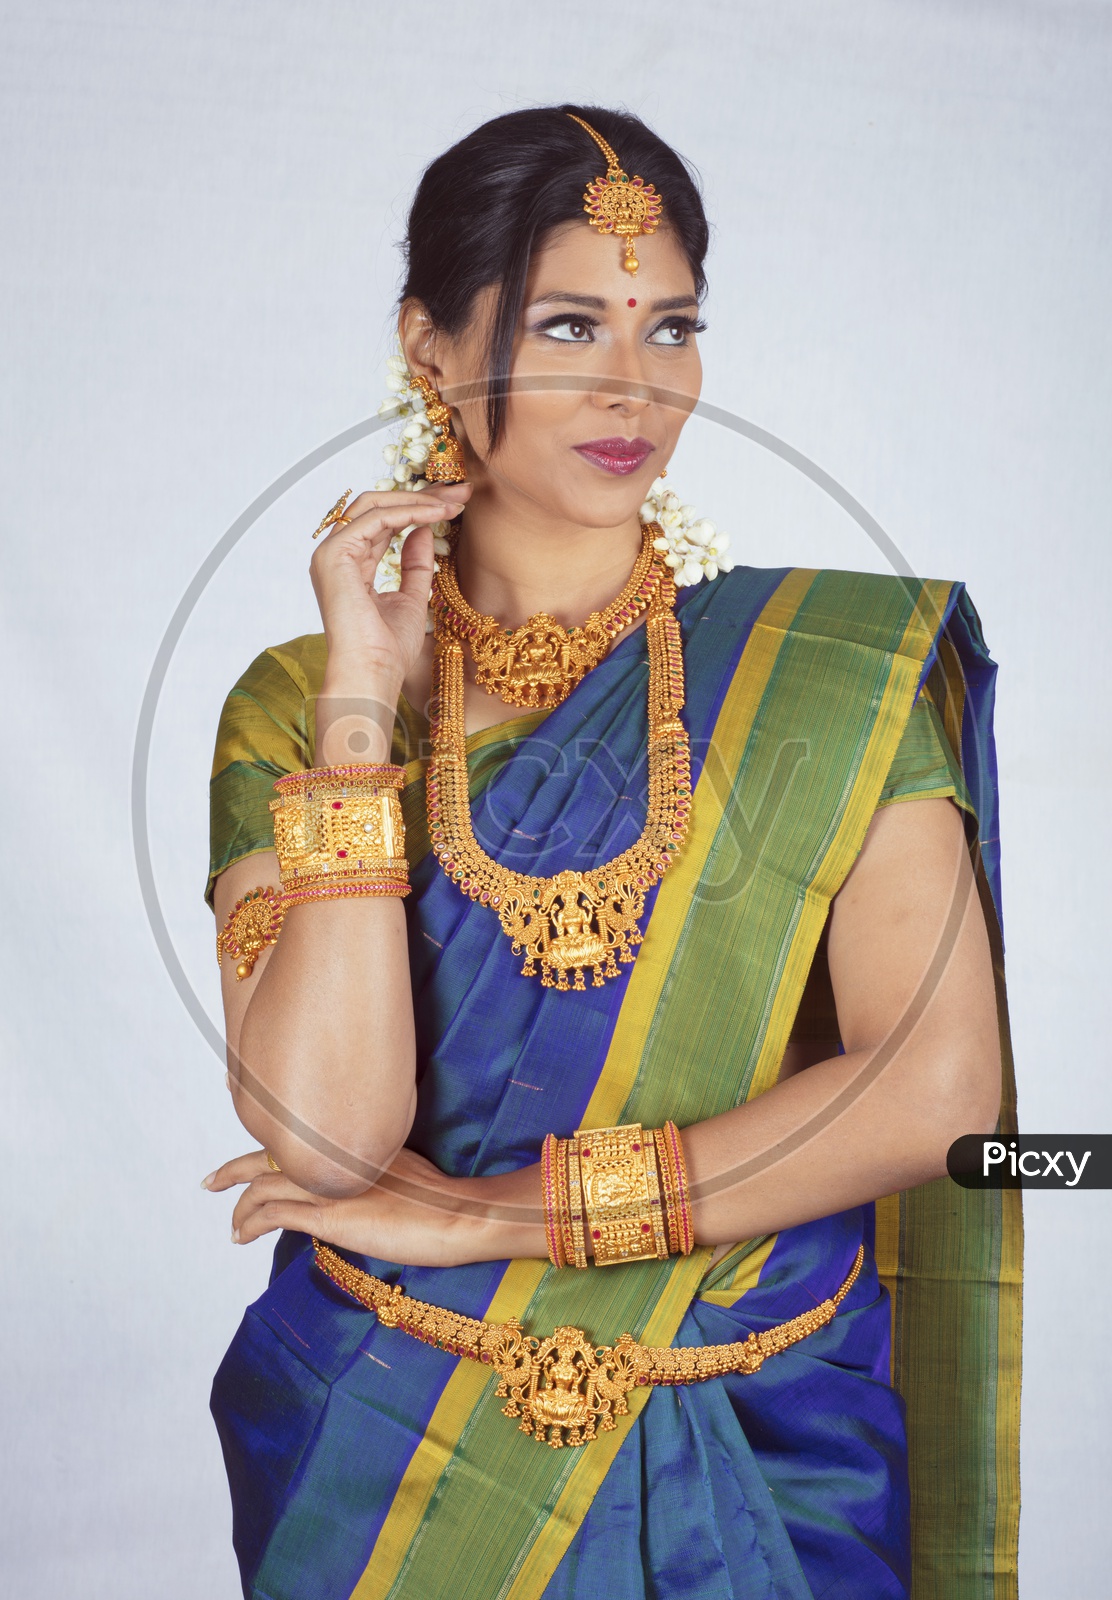 Traditional Indian Female/Woman Model in Blue Saree, green Blouse - Posing